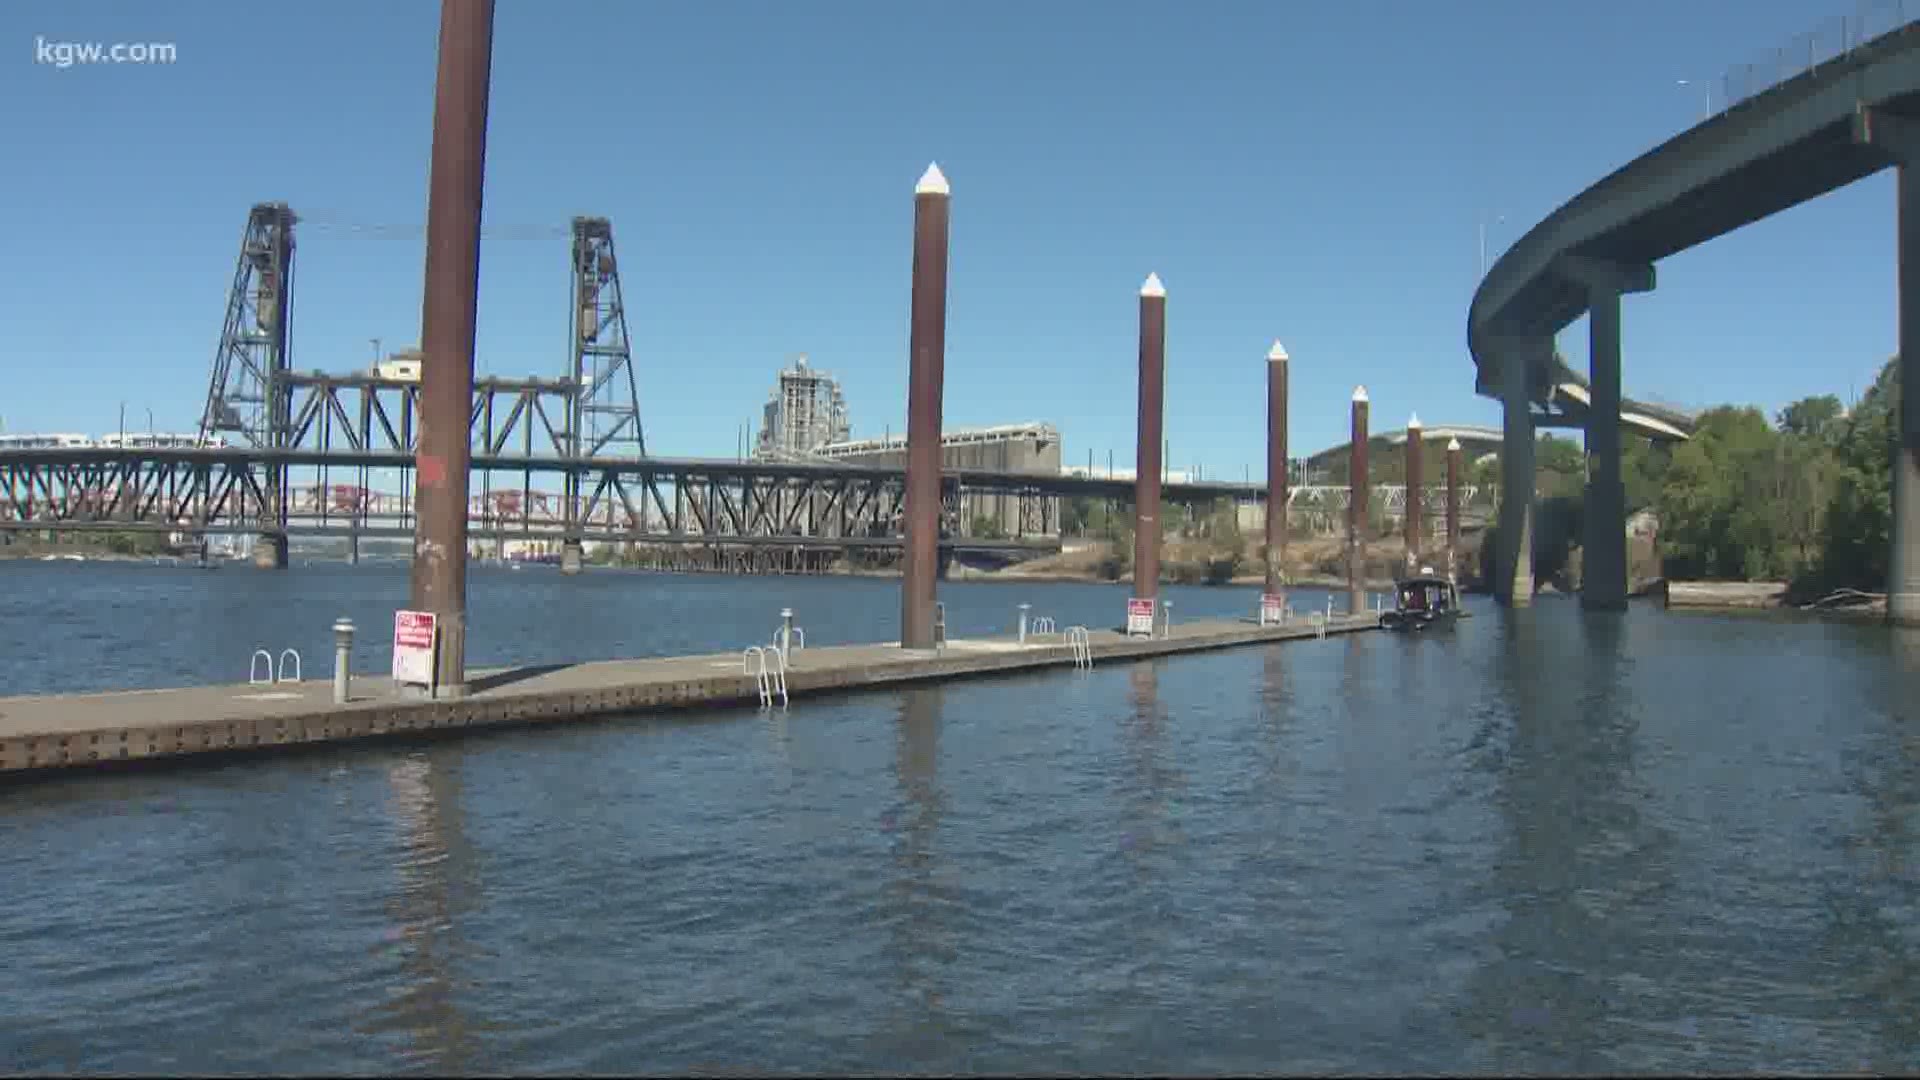 The Kevin Duckworth Memorial Dock is now a popular swimming hole. Keely Chalmers shows us the transformation.